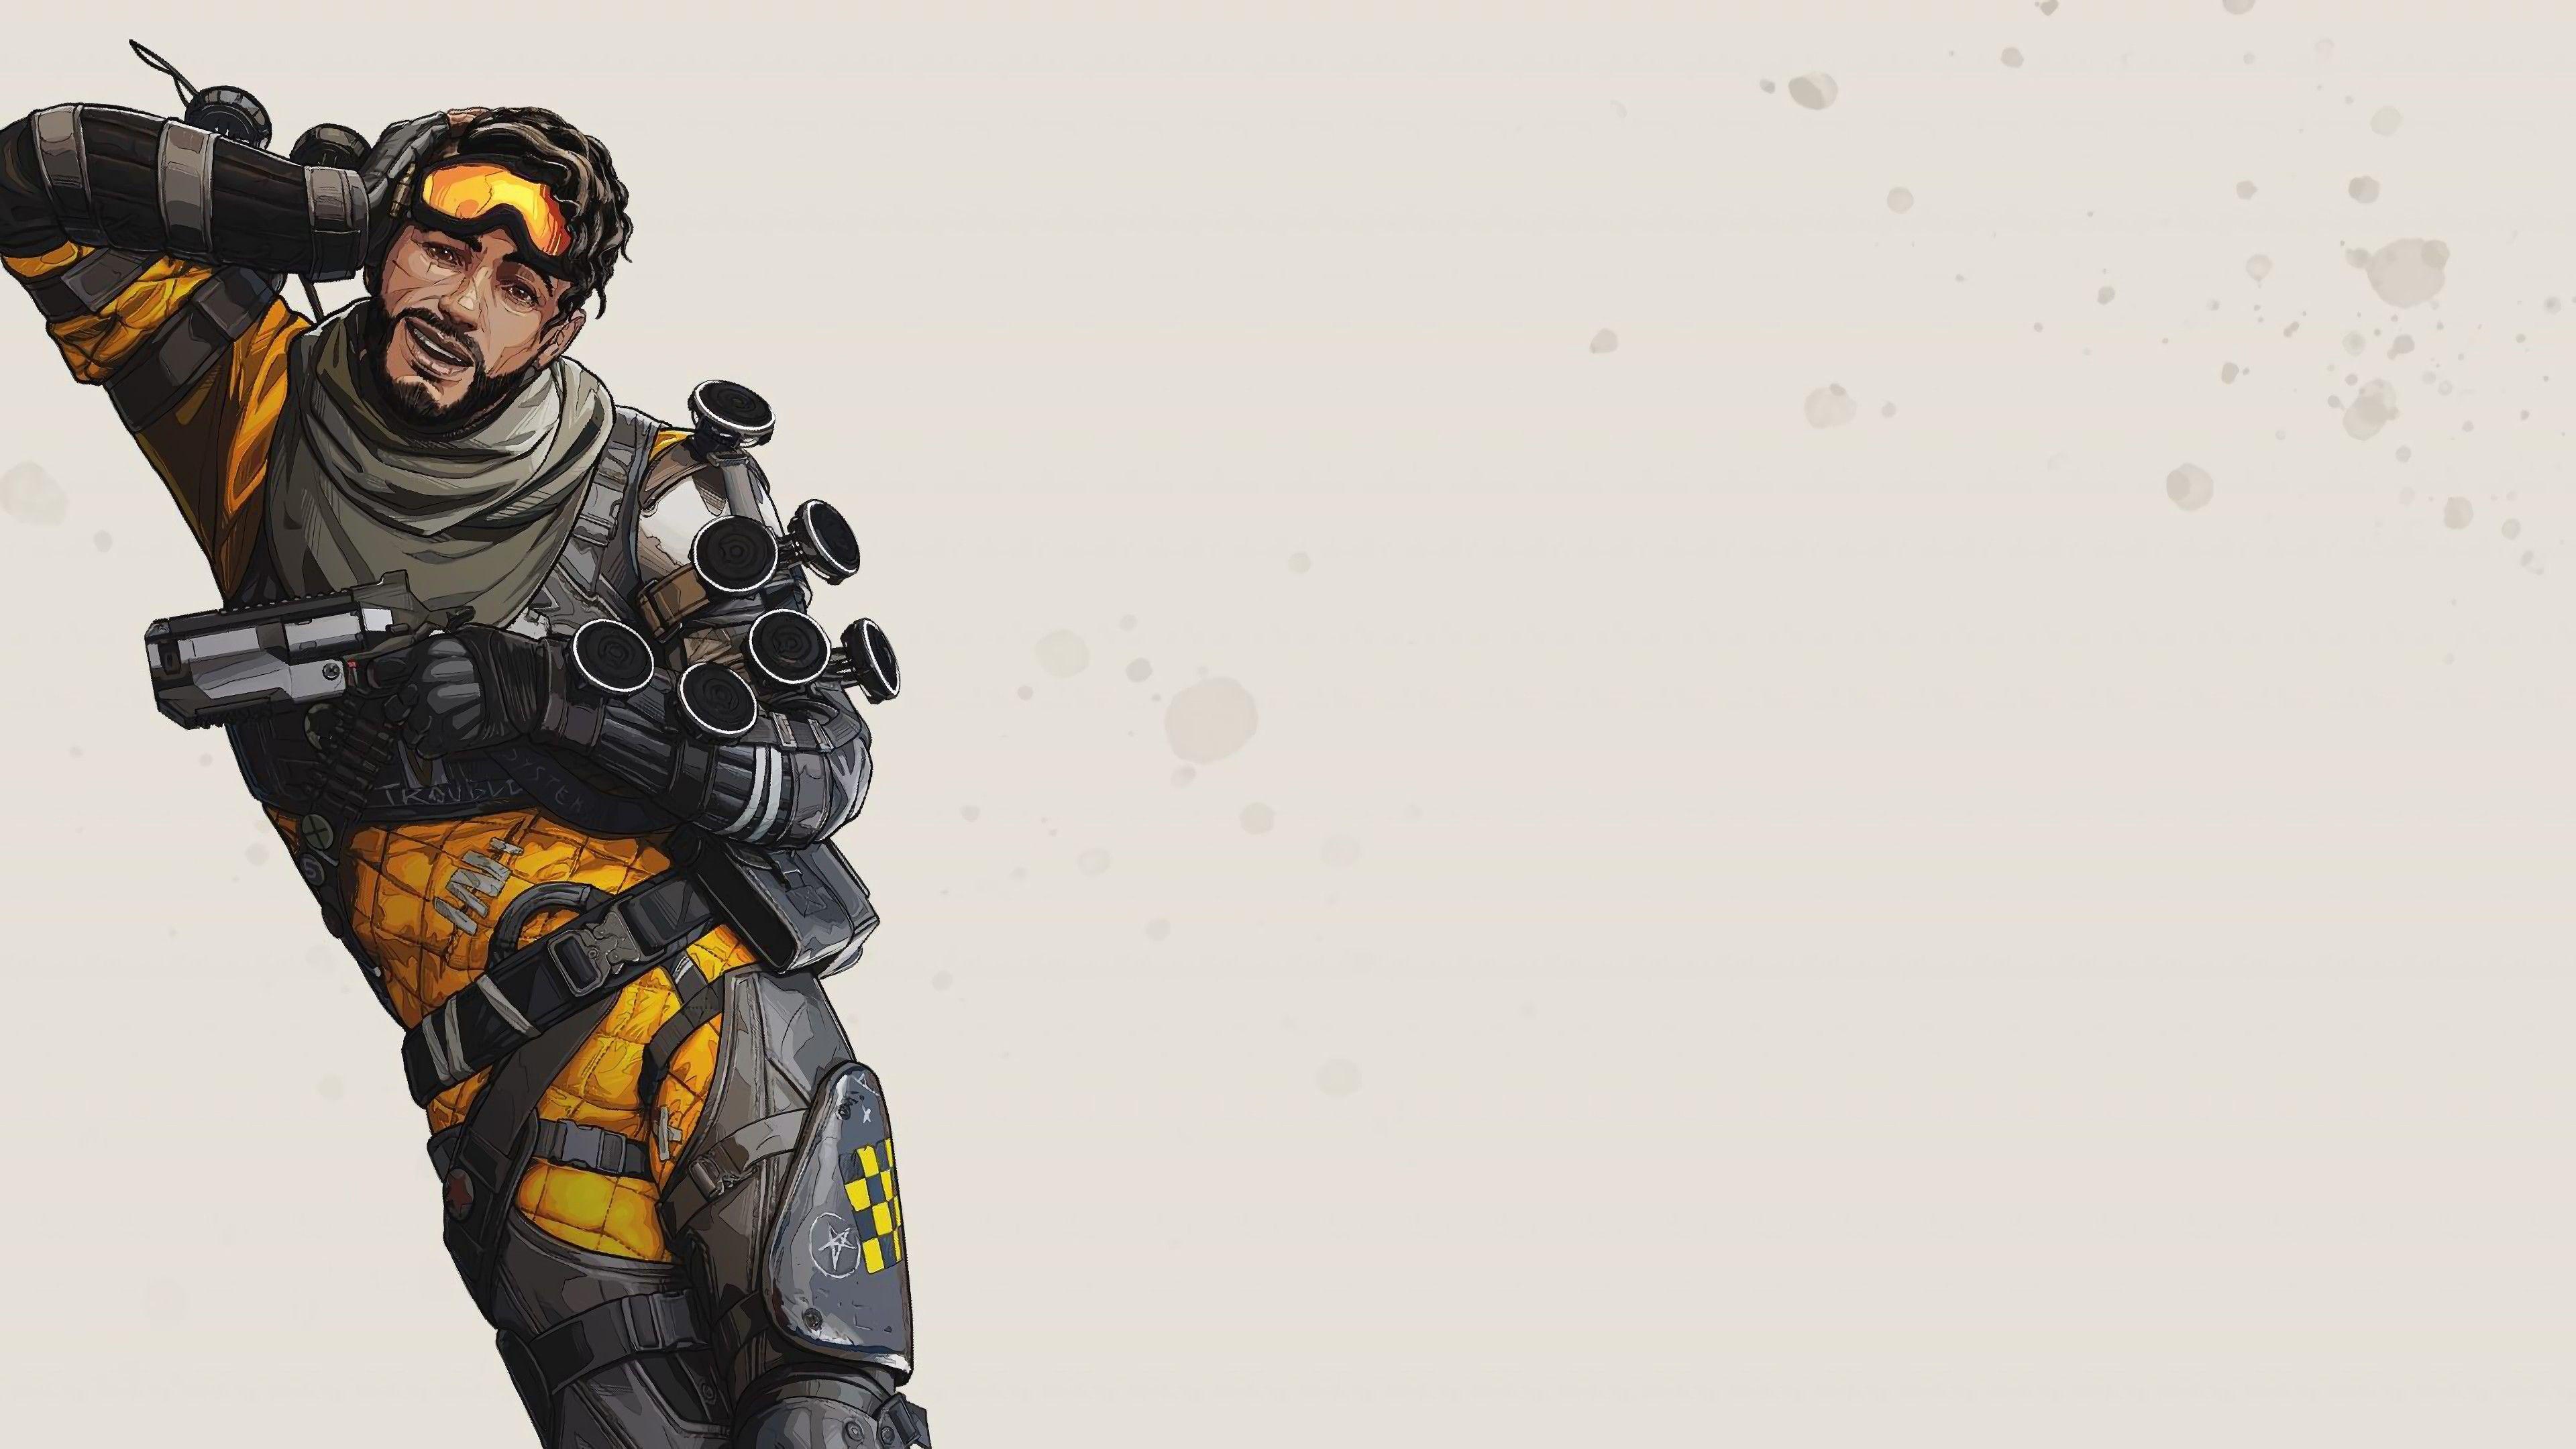 Featured image of post Apex Legends Mirage Wallpaper 1920X1080 You can also download and share your favorite wallpapers check out this awesome collection of awesome apex legends game wallpapers bloodhound is the top choice wallpaper images for your desktop